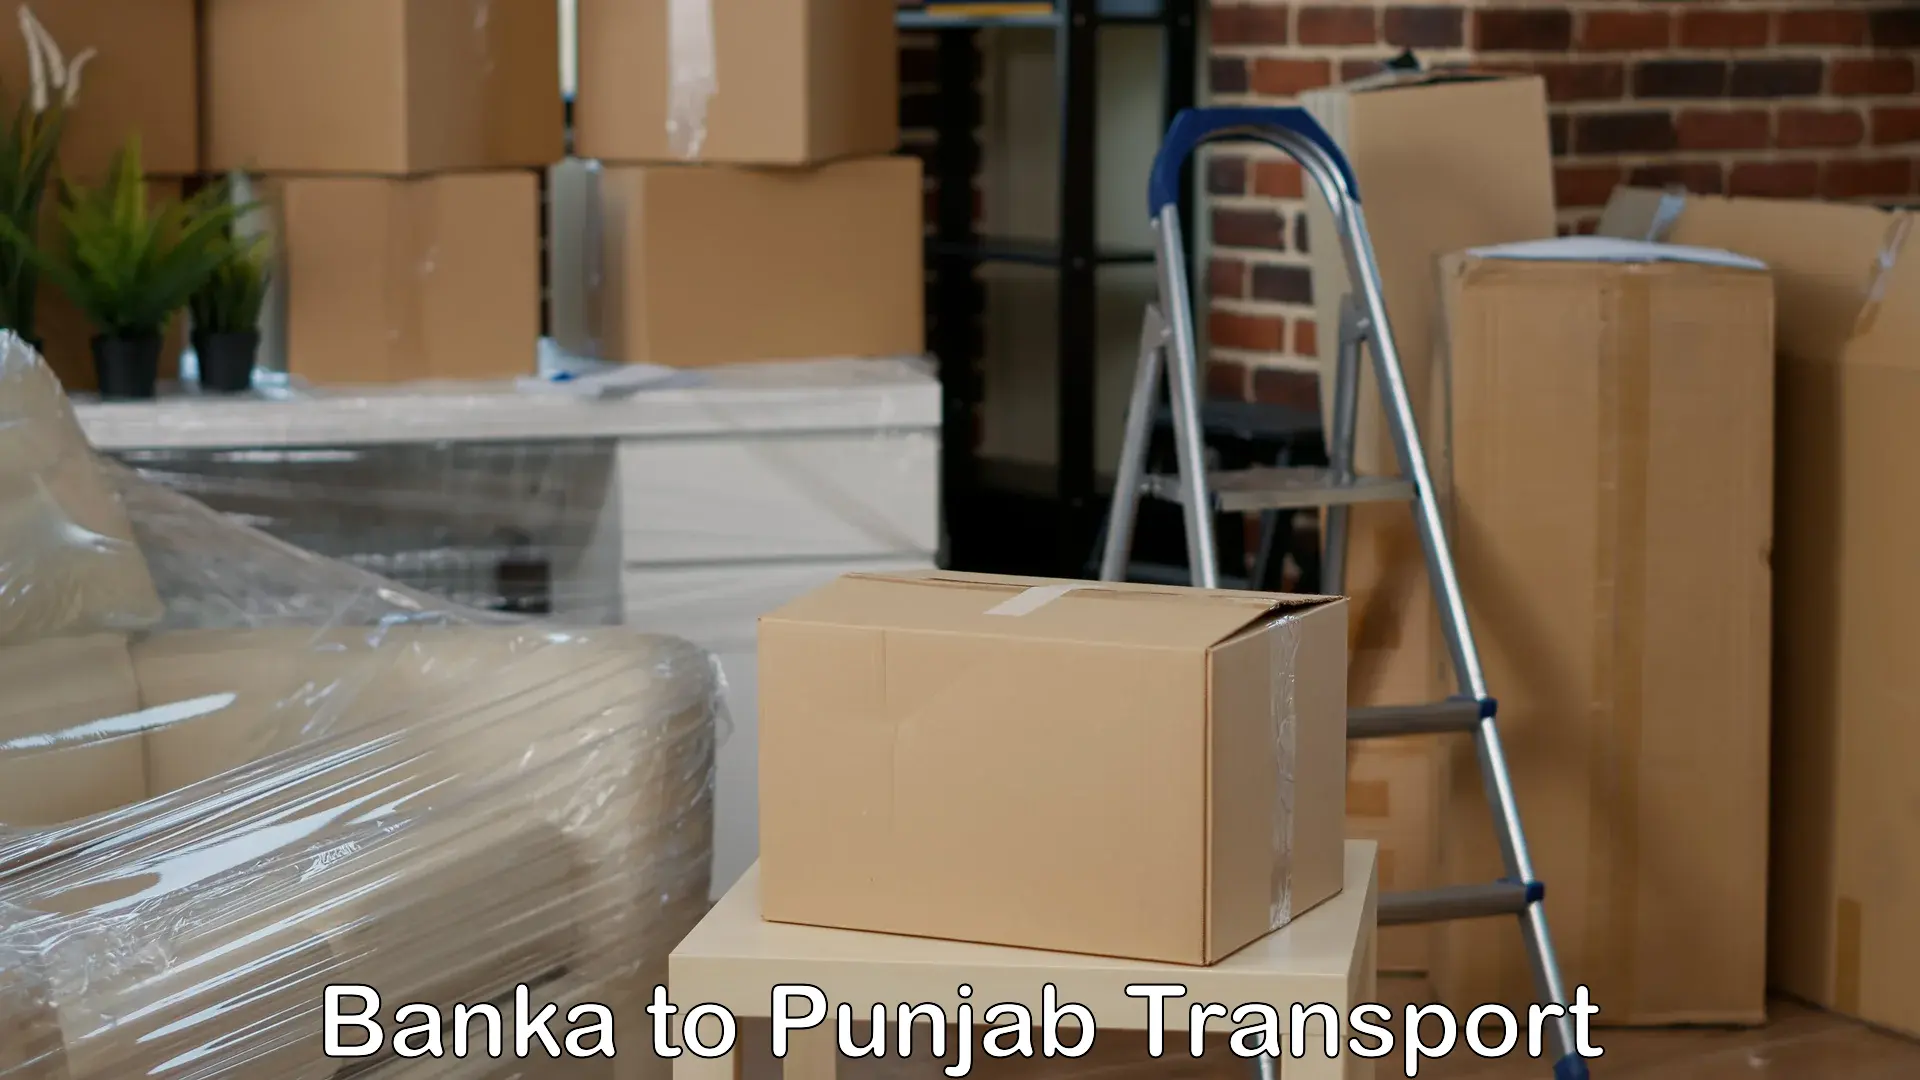 Truck transport companies in India Banka to Khanna